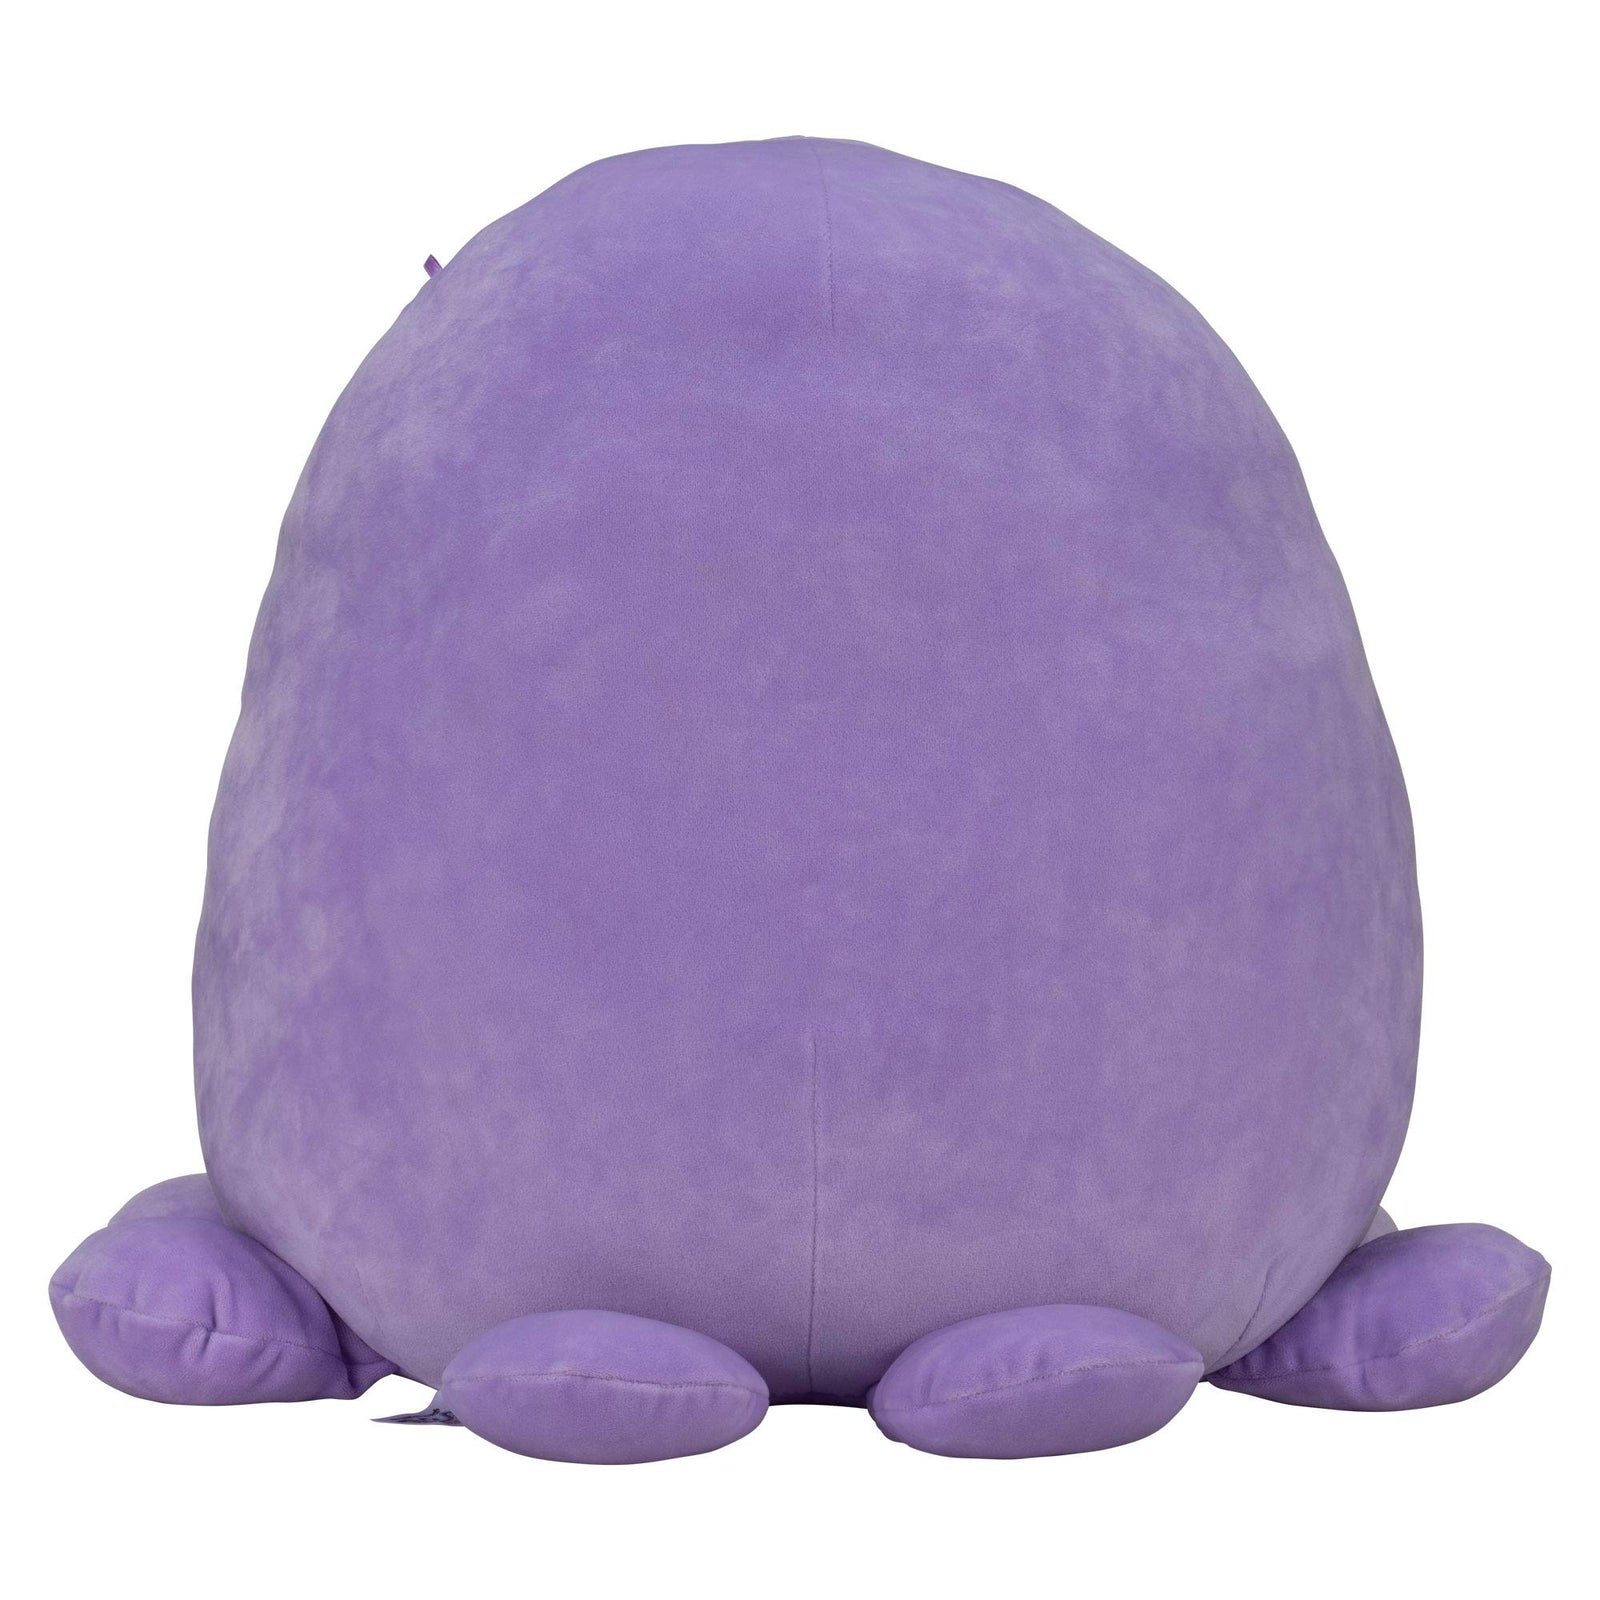 Squishmallow Official Kellytoy Plush 16" Violet The Octopus- Ultrasoft Stuffed Animal Plush Toy